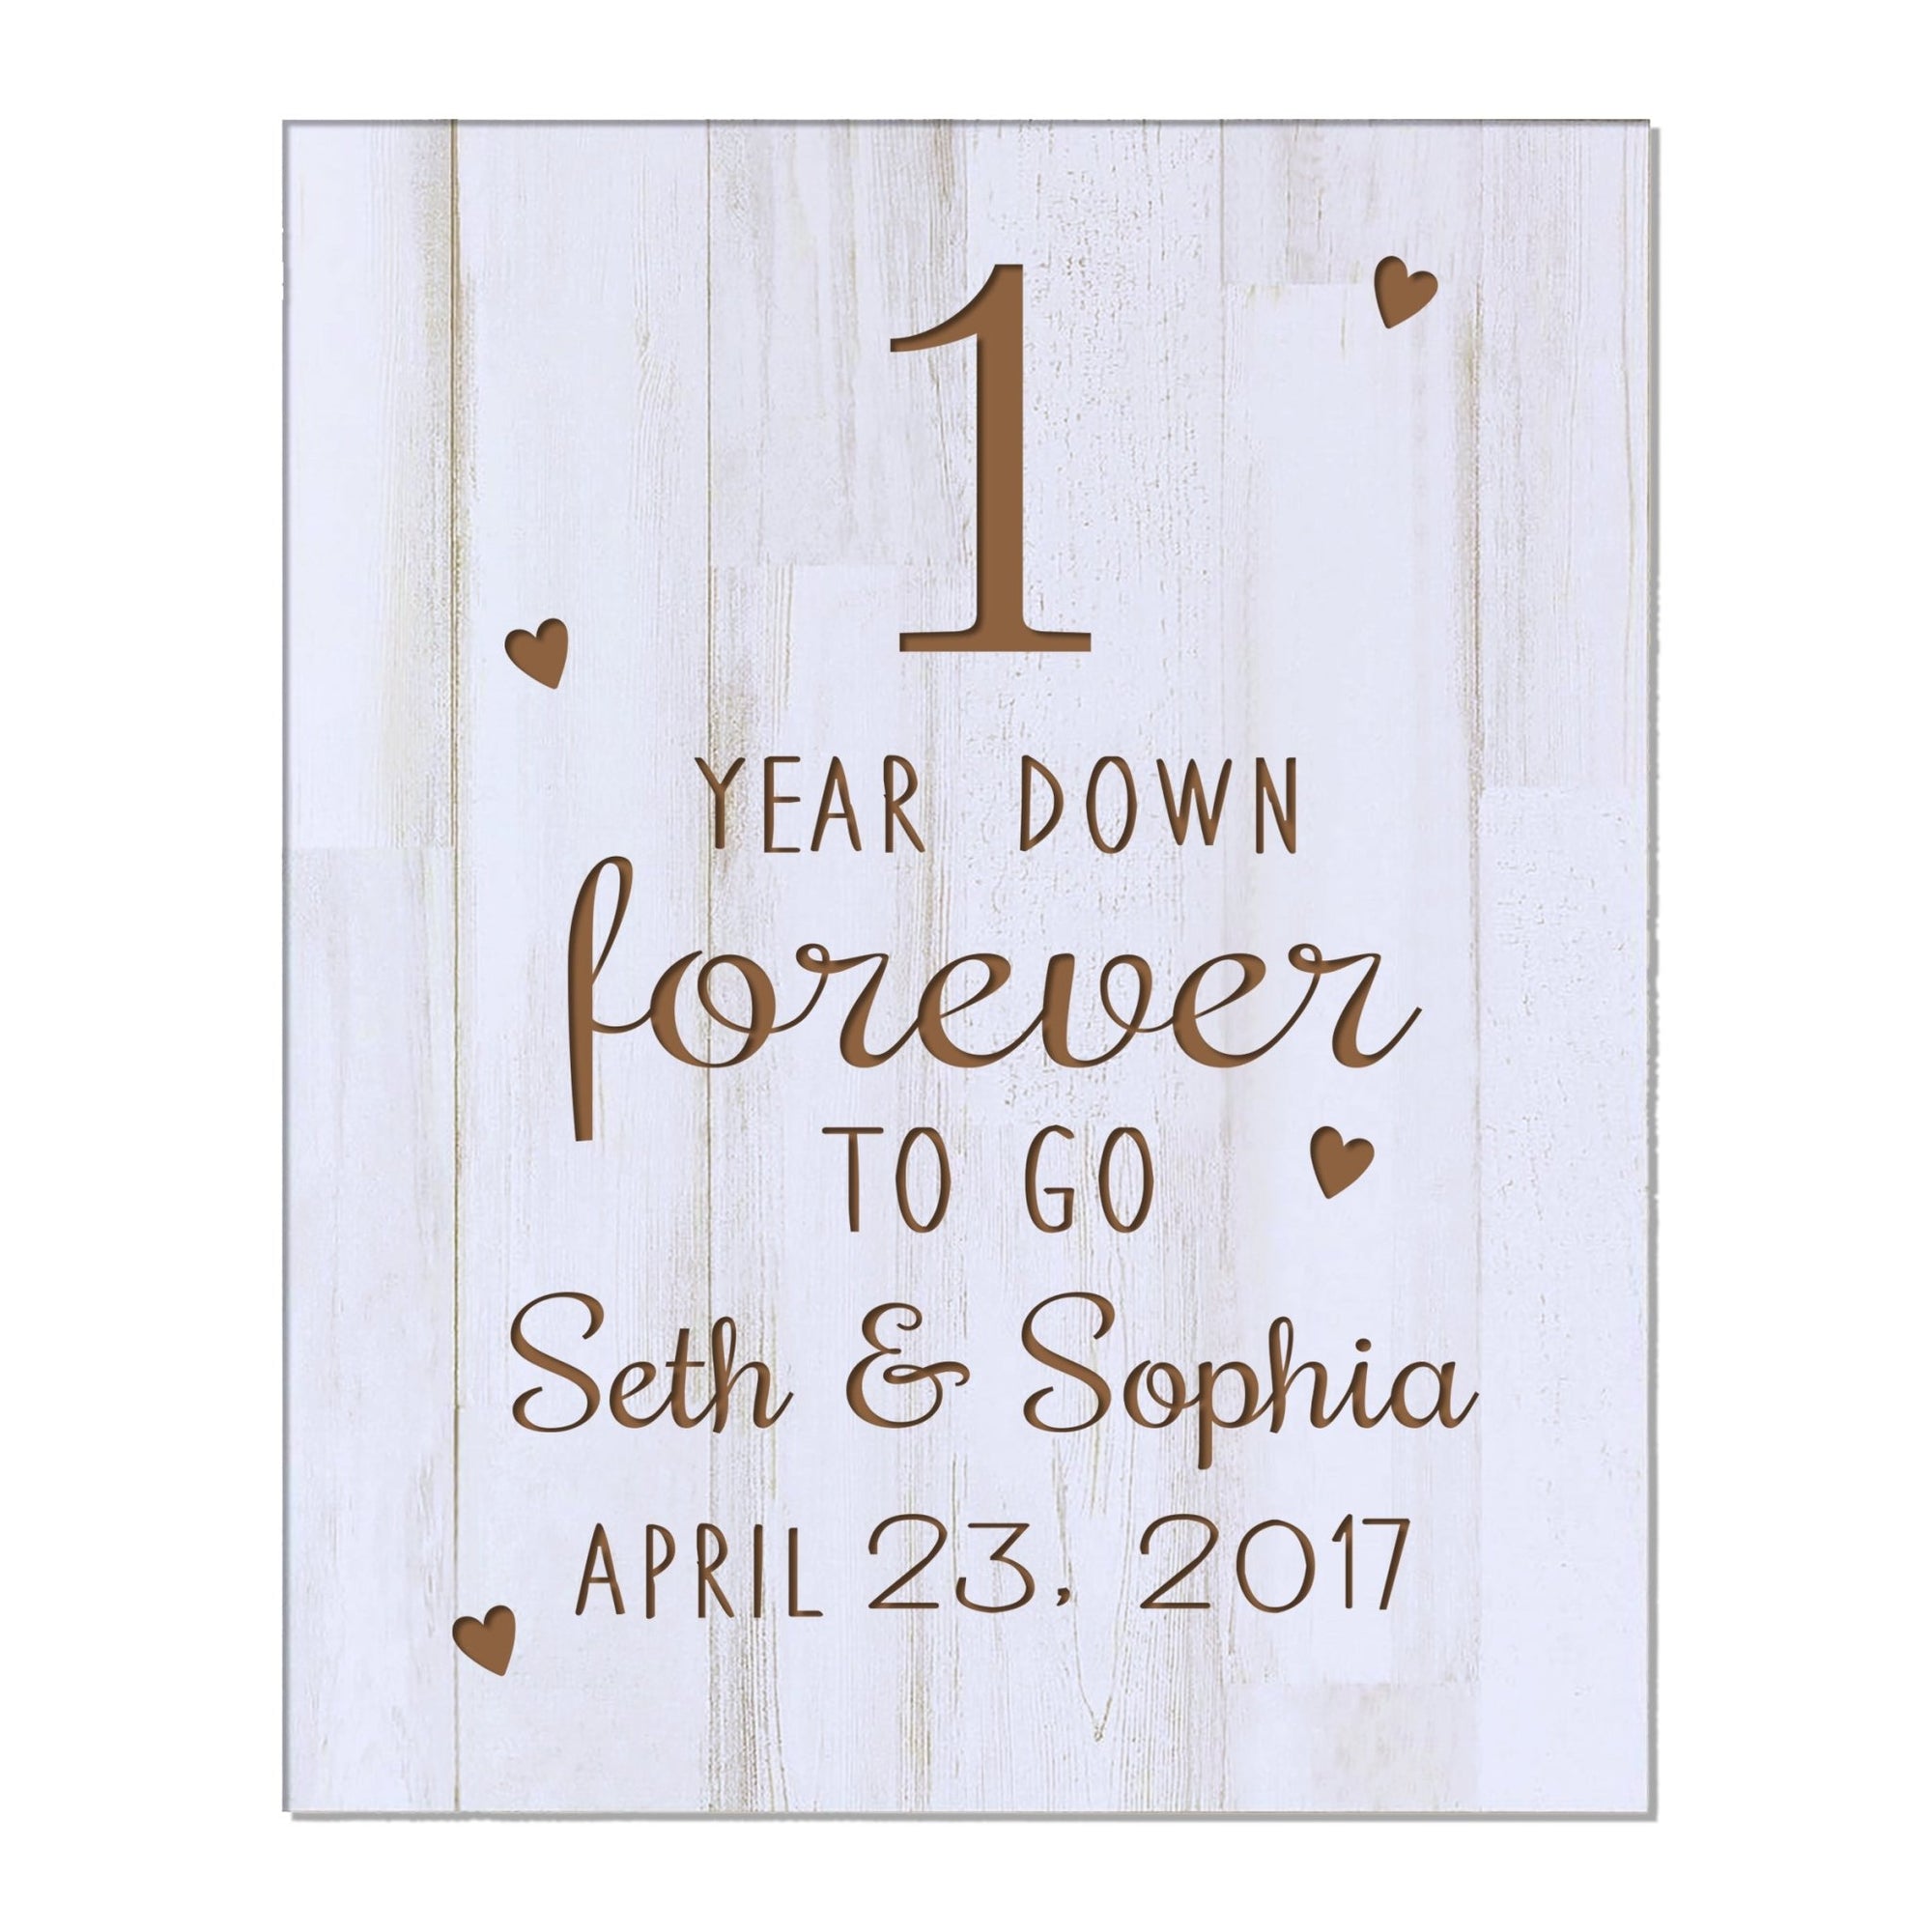 Personalized 8x10 Anniversary Plaques - 1 Year Down - LifeSong Milestones